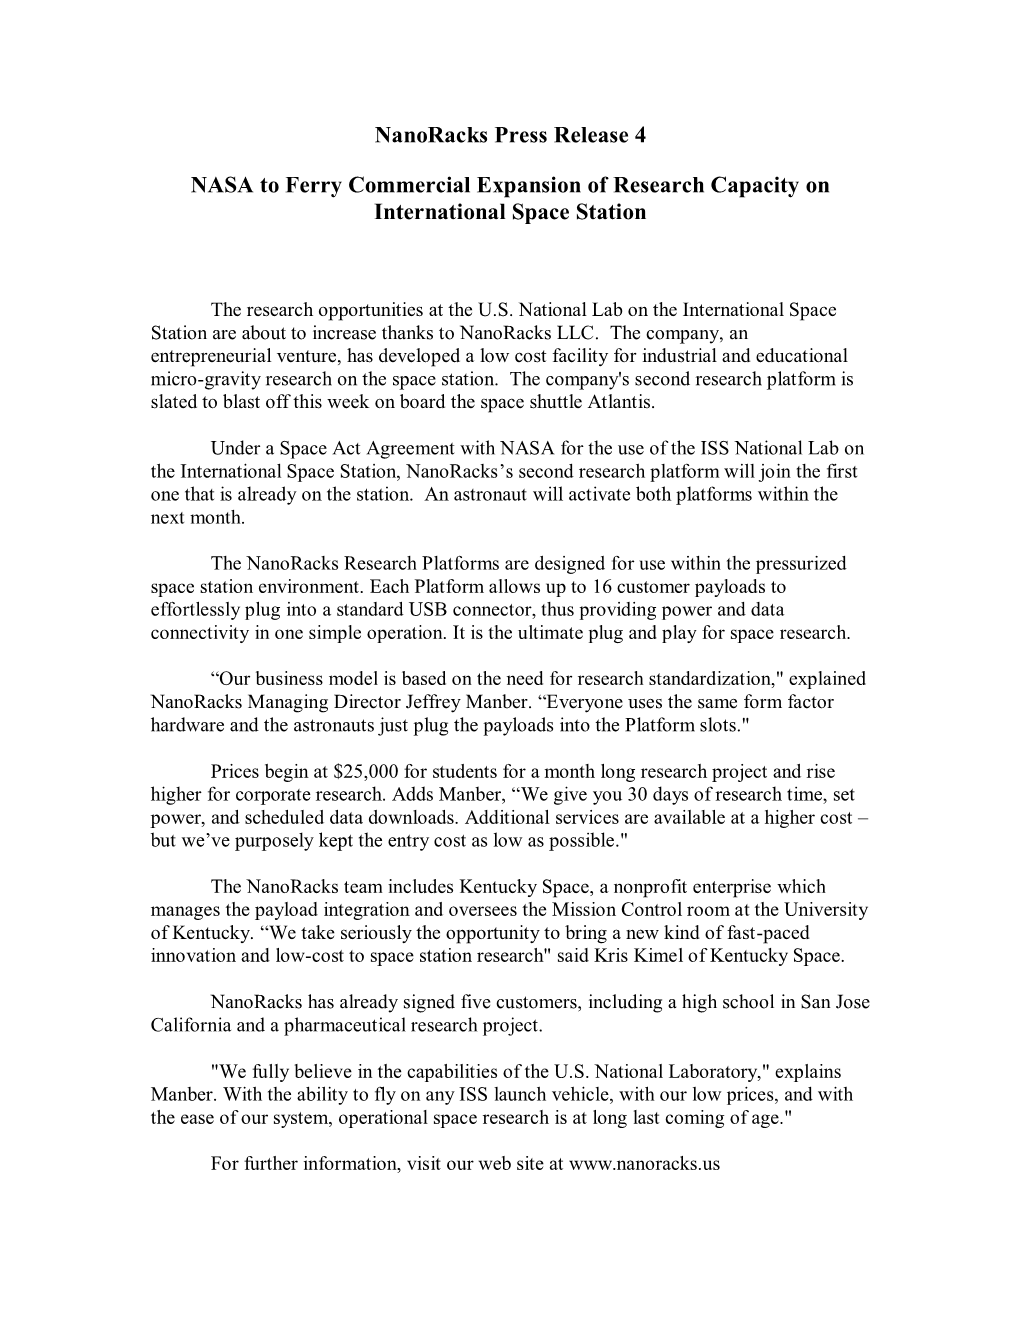 Nanoracks Press Release 4 NASA to Ferry Commercial Expansion Of